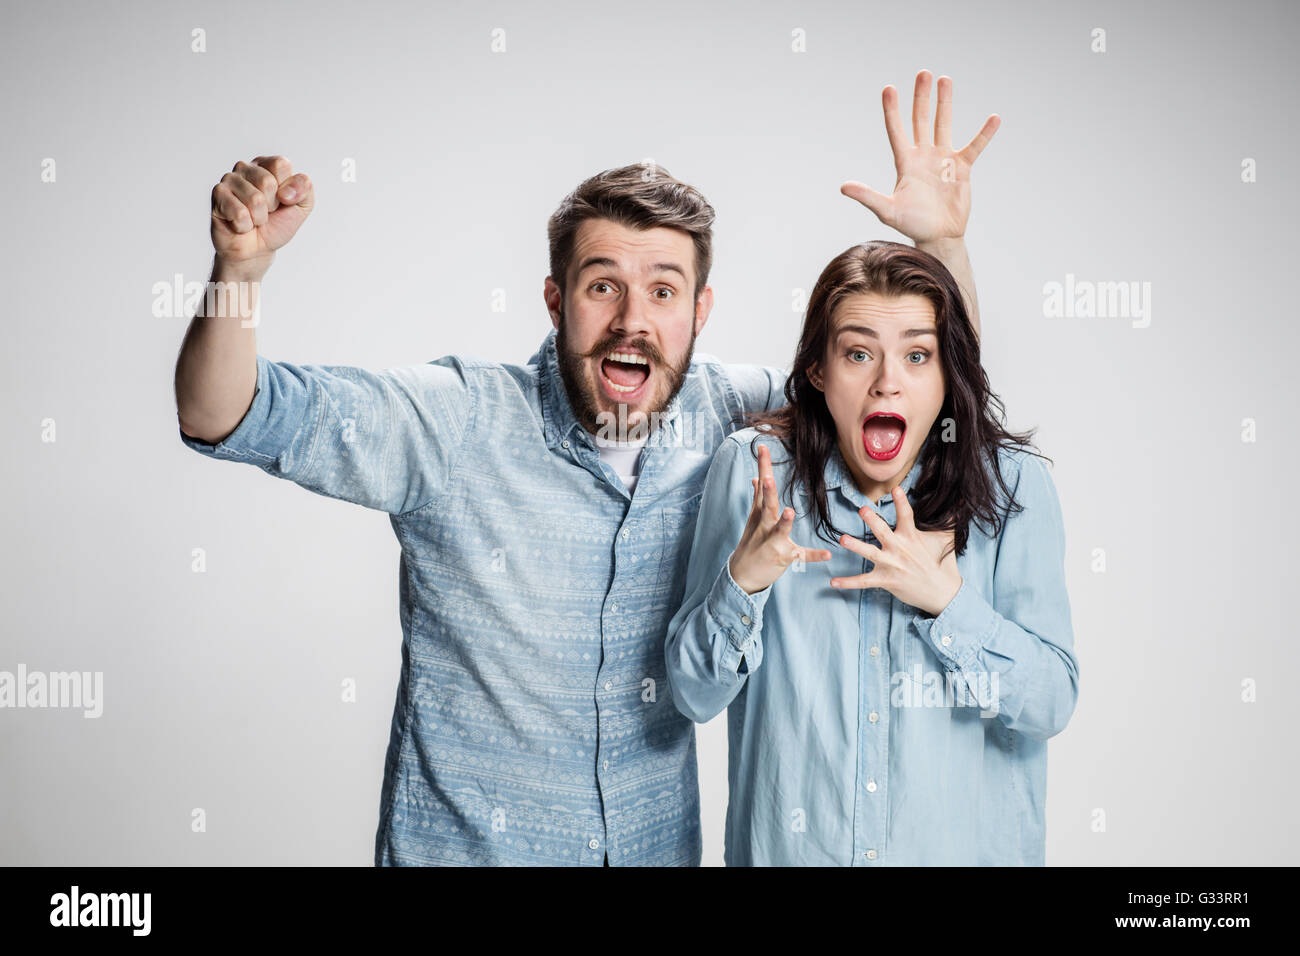 The love, family, sports, entretainment and happiness concept Stock Photo